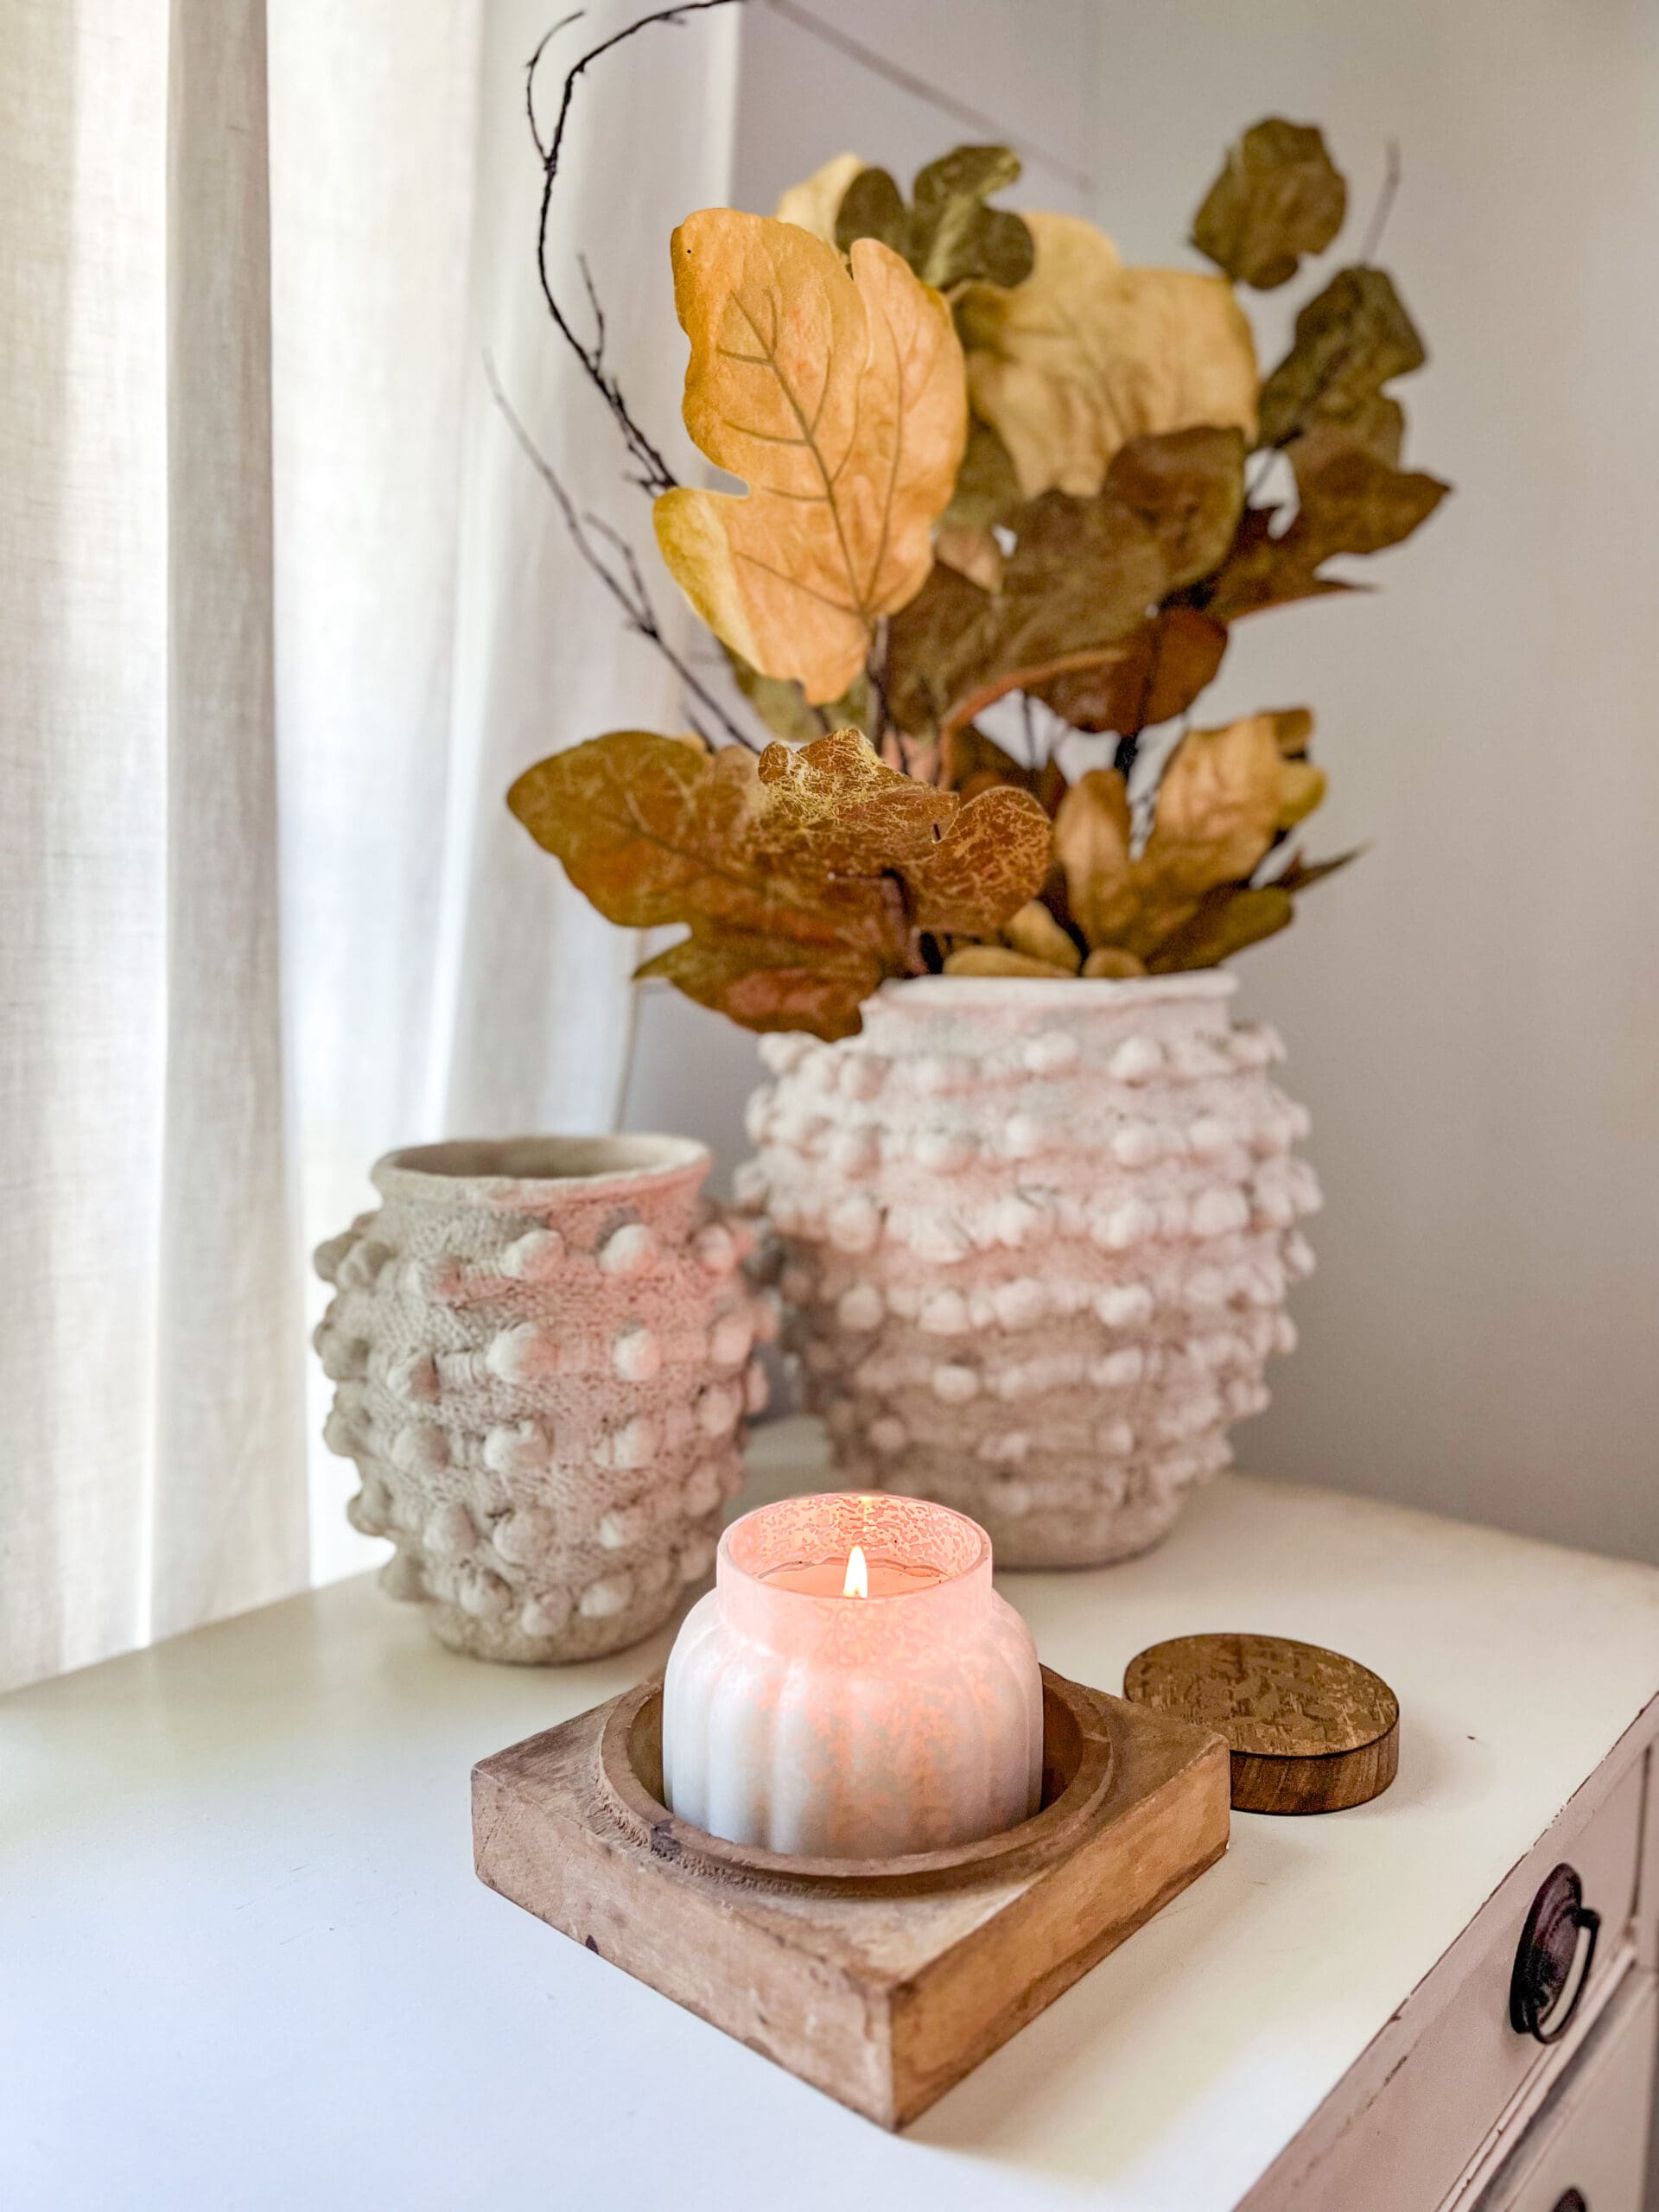 vignette styled with two white textured vases holding dried leaves, and a cozy candle on a wooden base